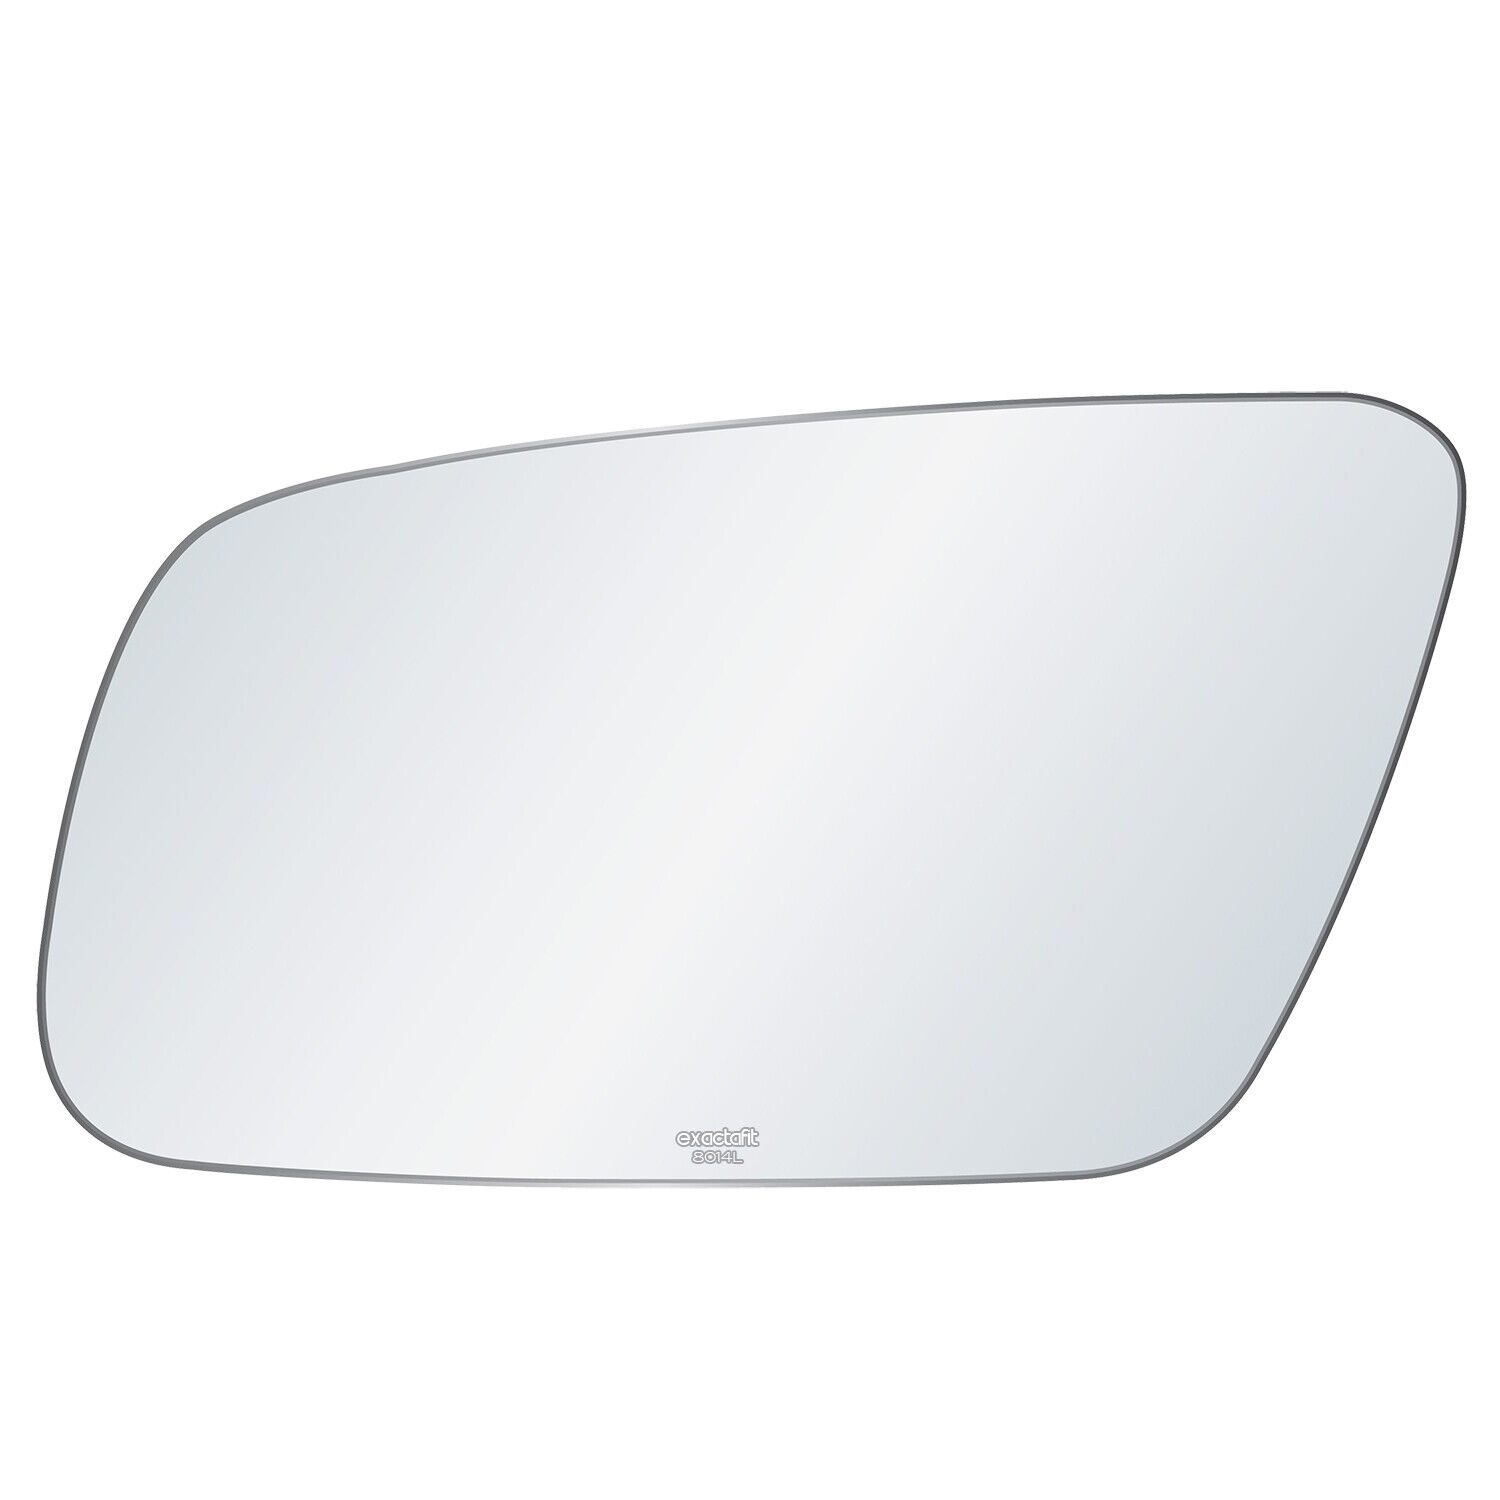 Replacement Left Side View Mirror Glass For Audi A4 S4 A6 S6 A8 S8 3M Adhesive